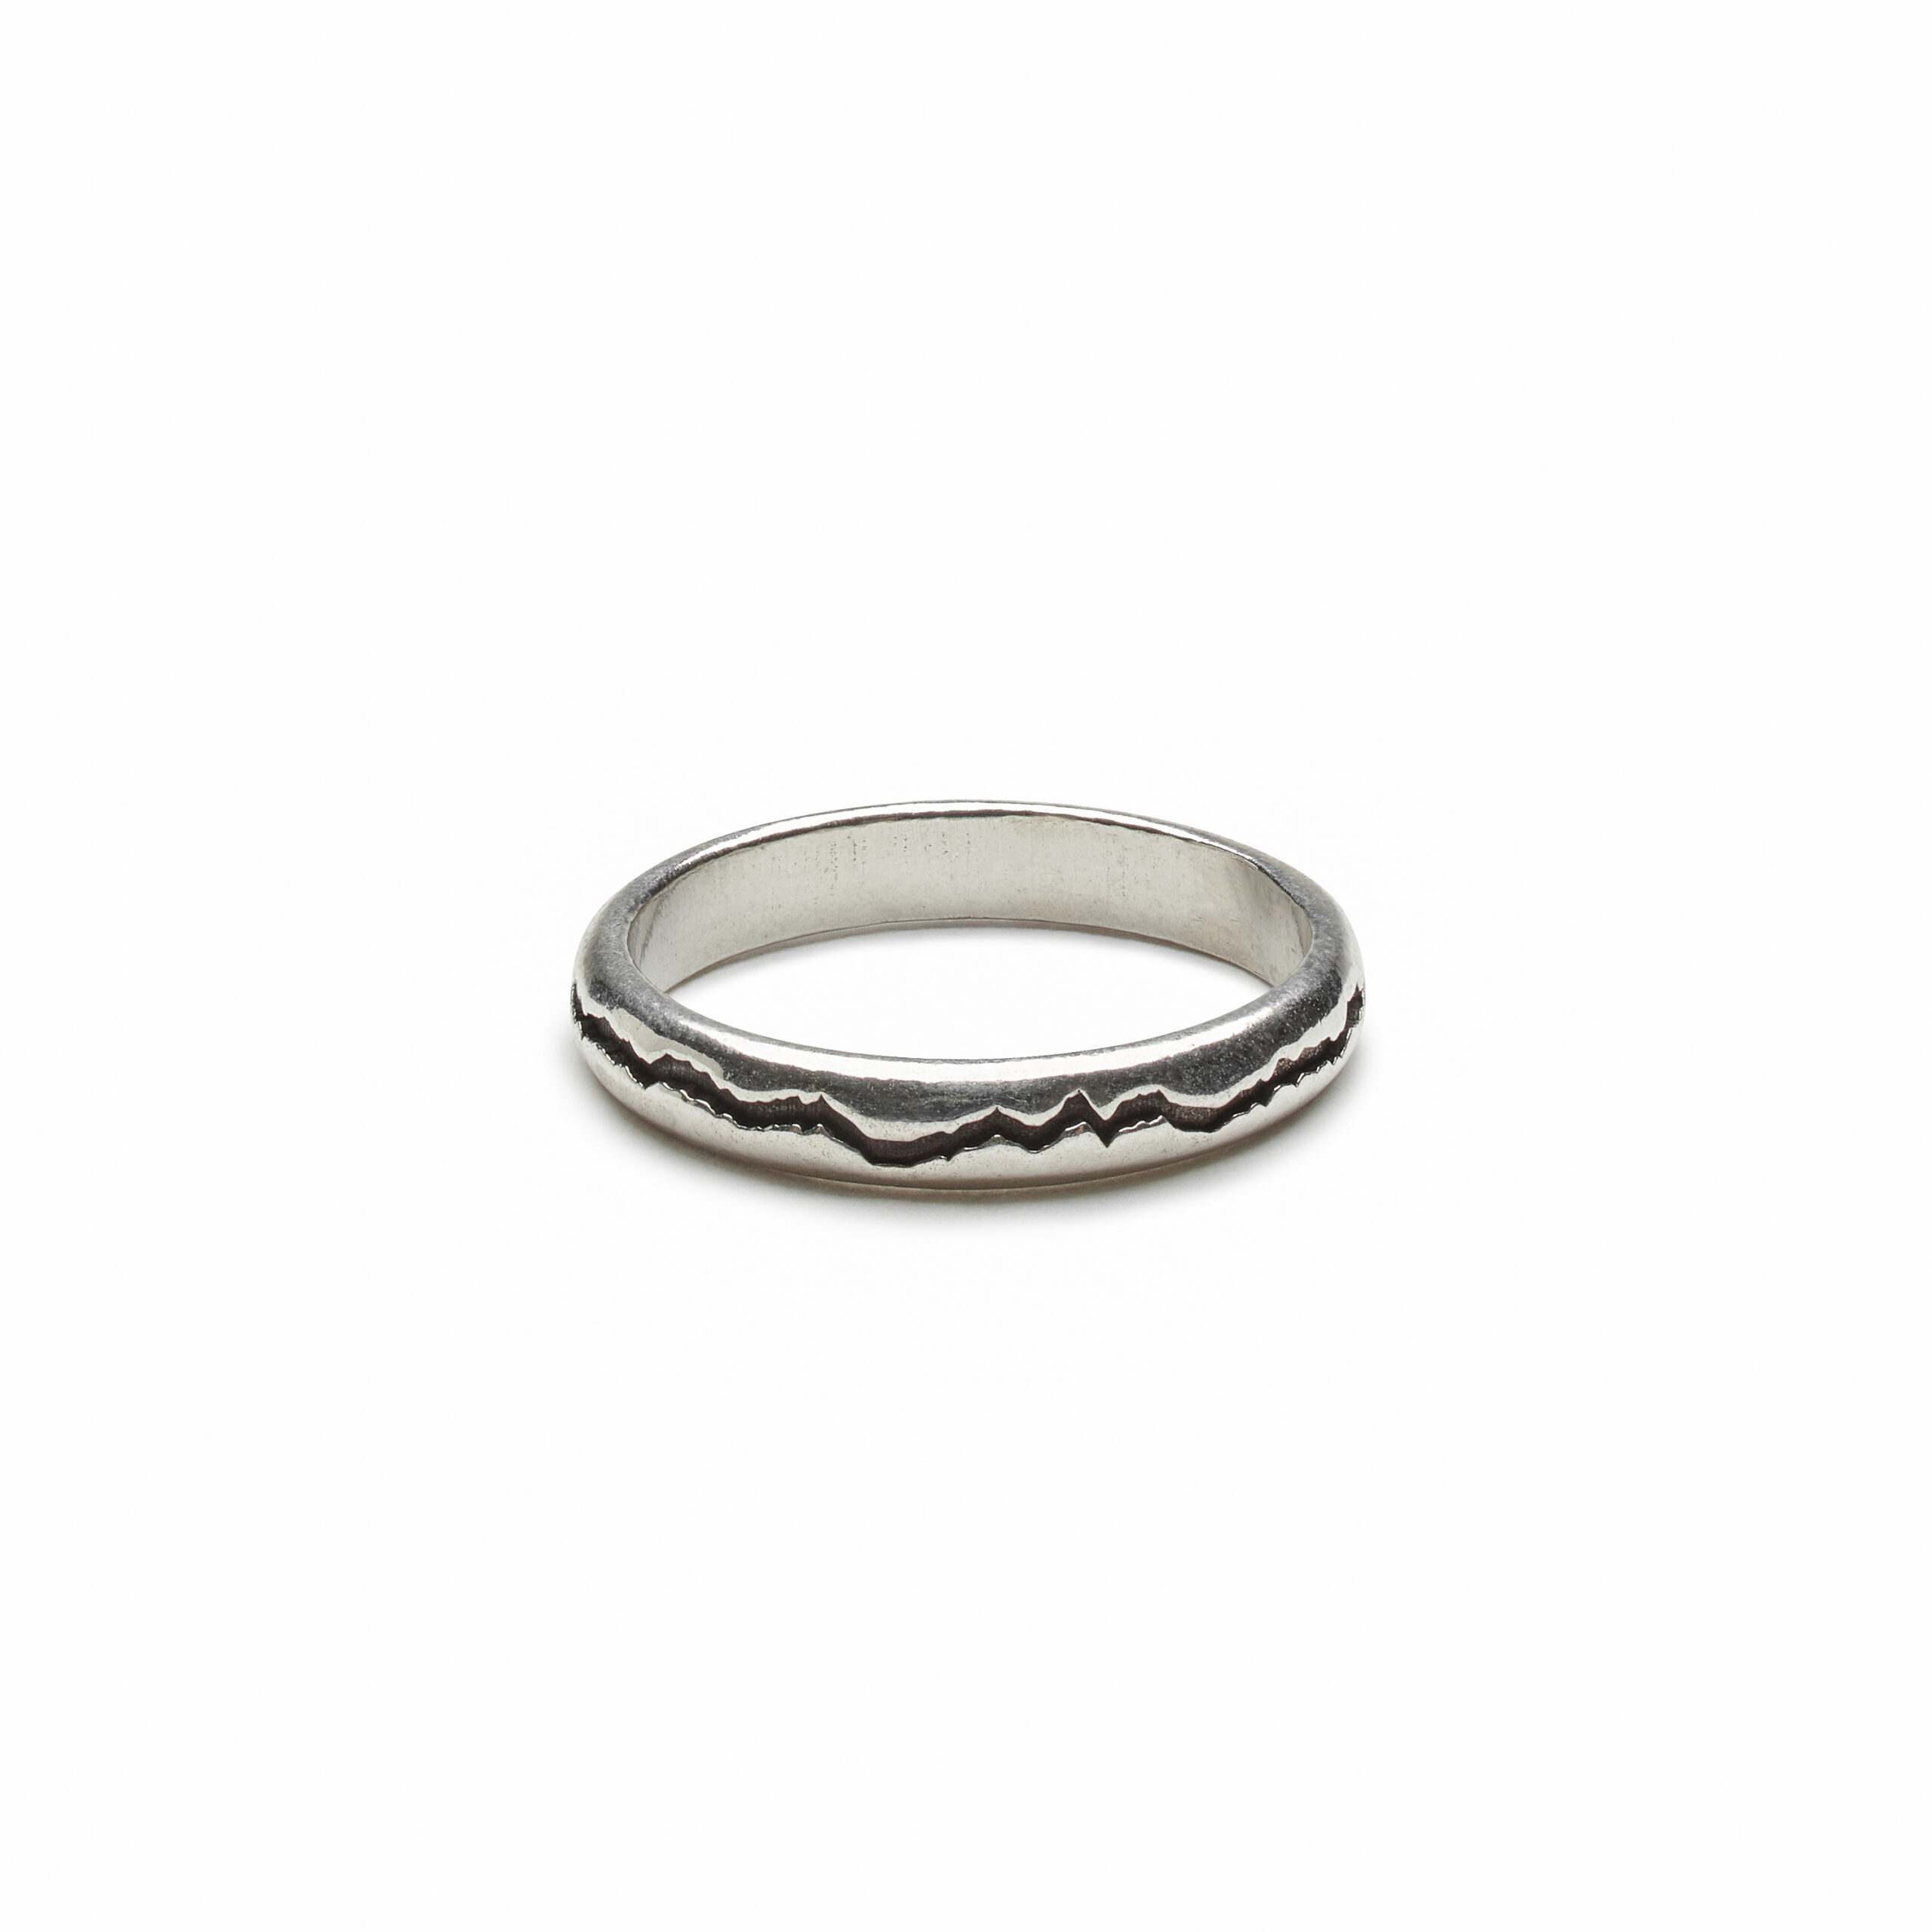 LT rounded ring